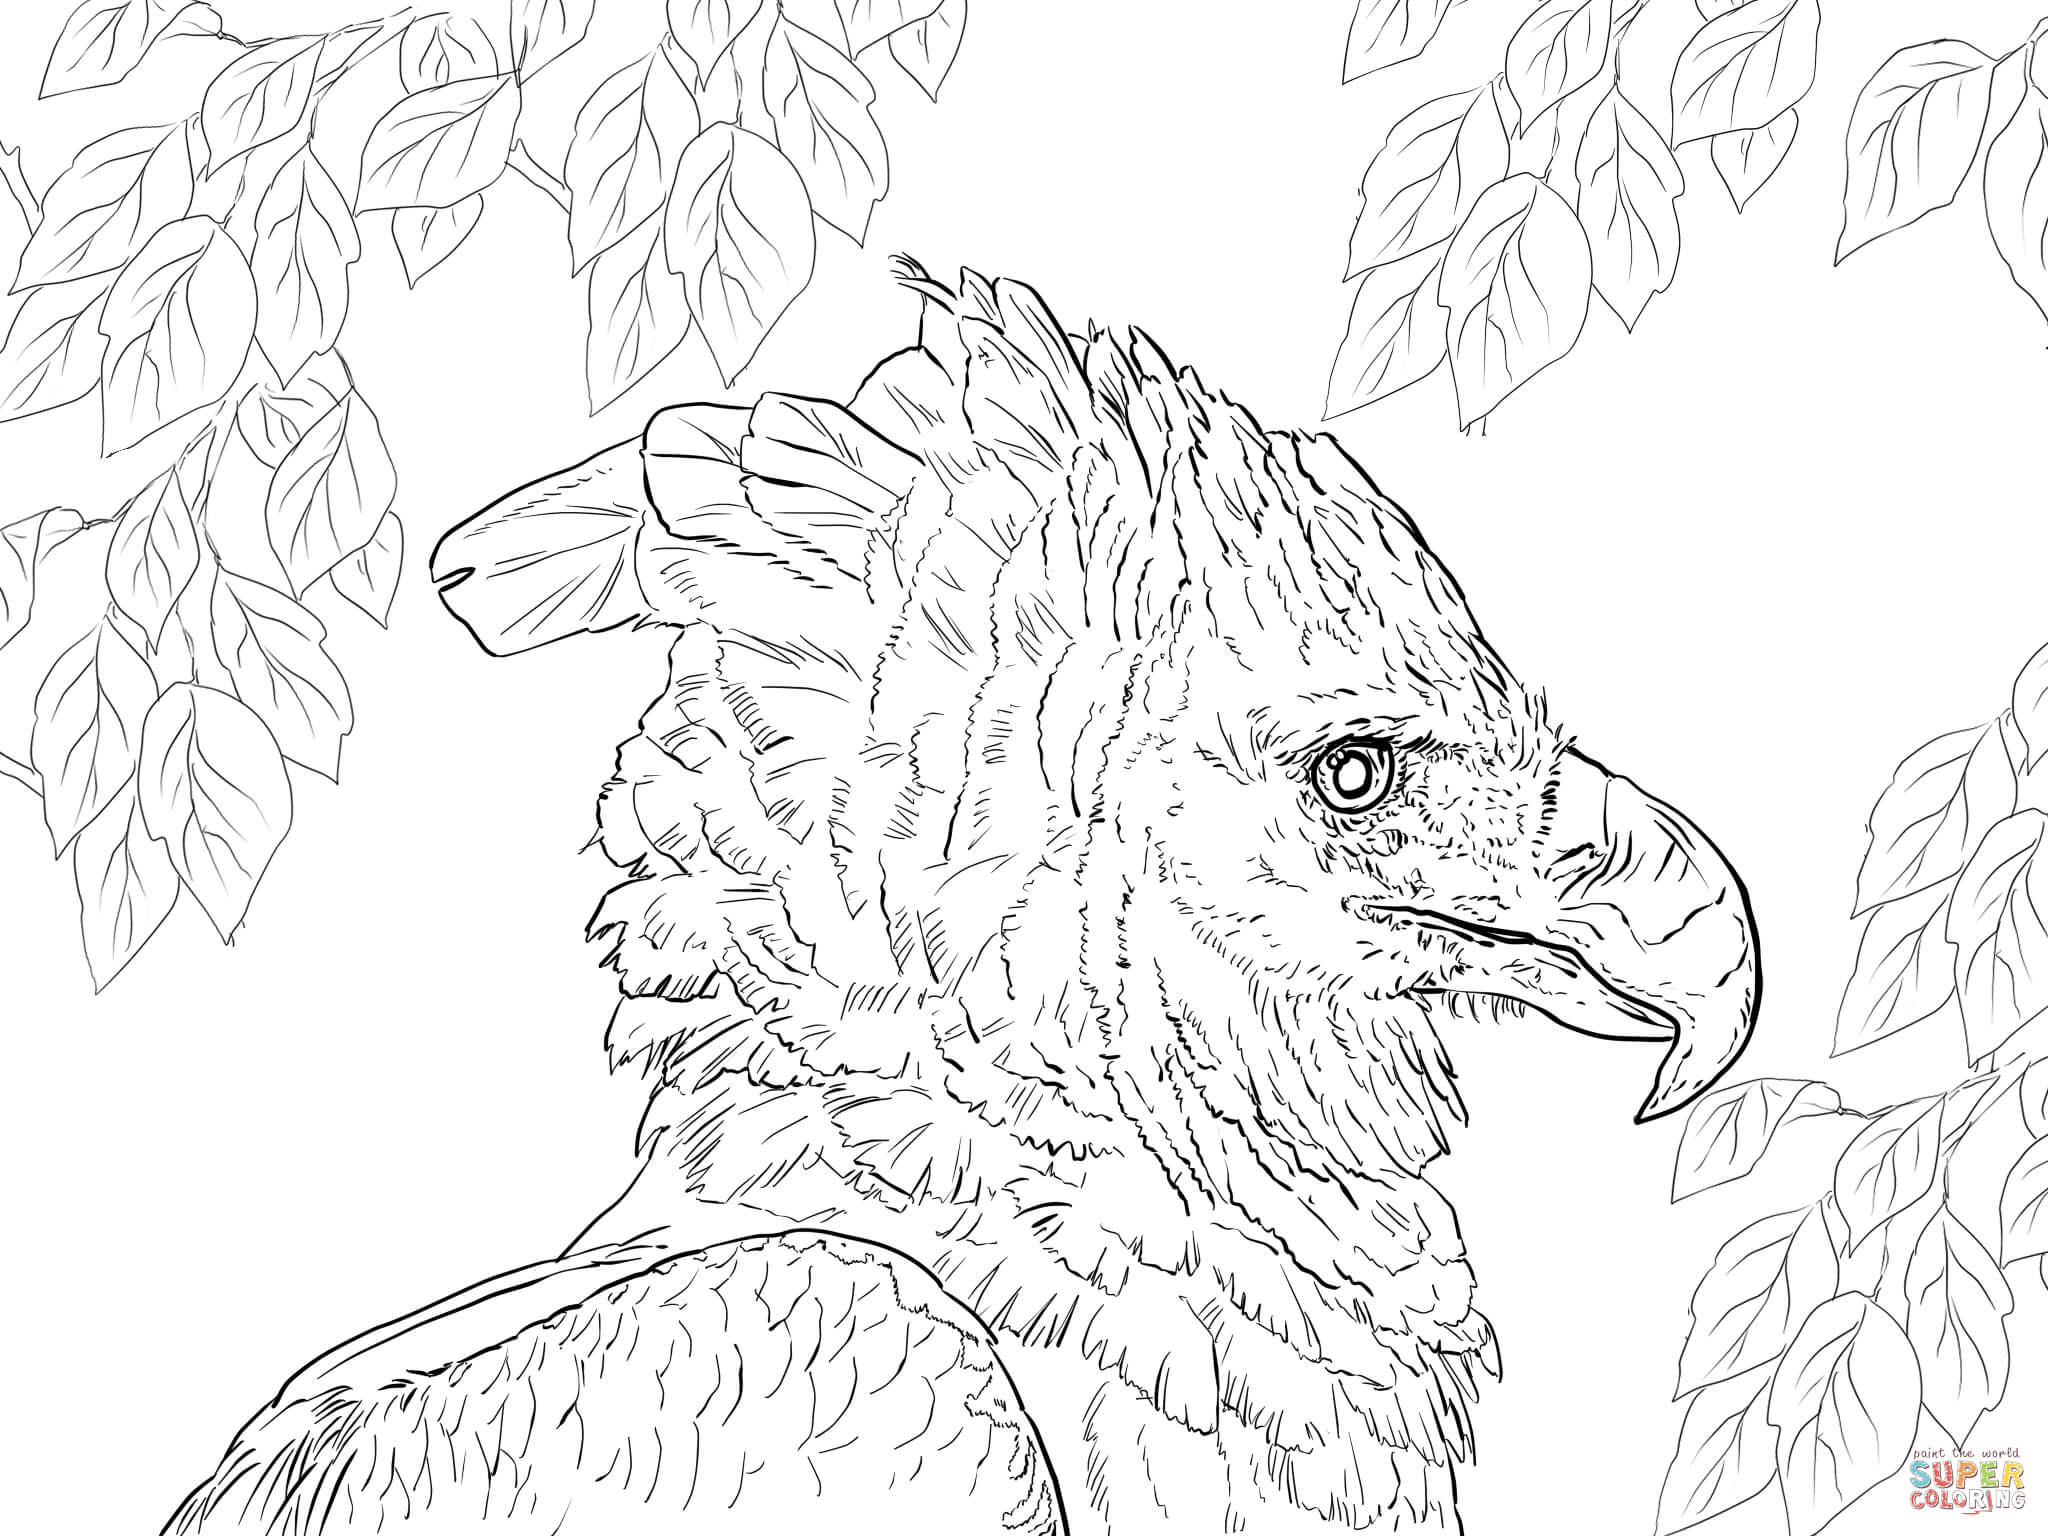 Harpy Eagle coloring #8, Download drawings